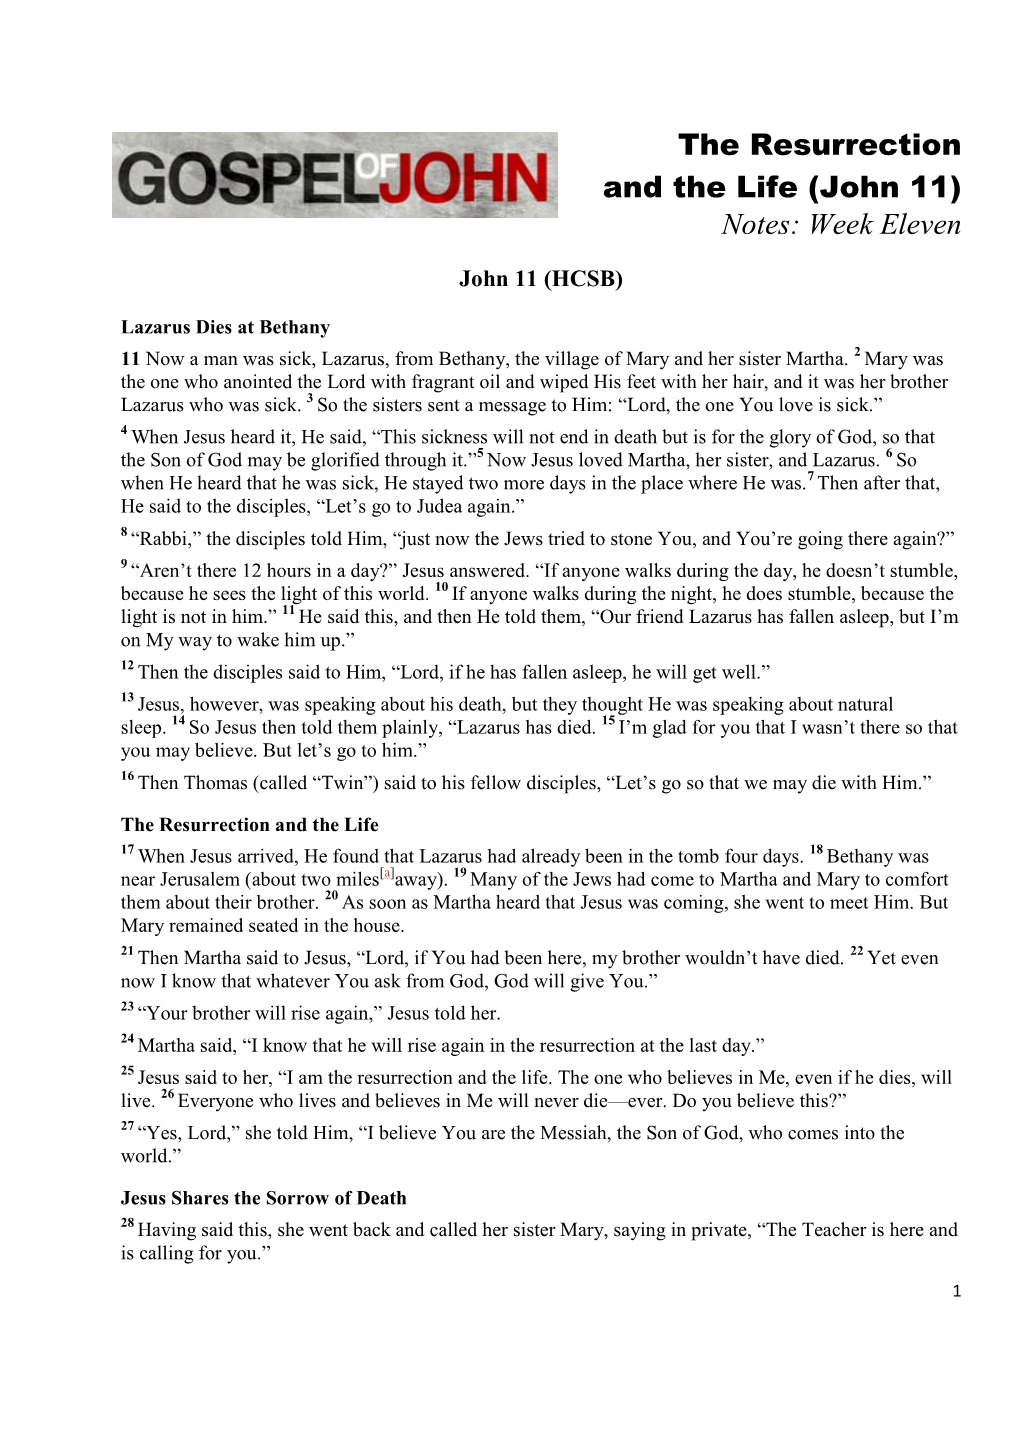 The Resurrection and the Life (John 11) Notes: Week Eleven